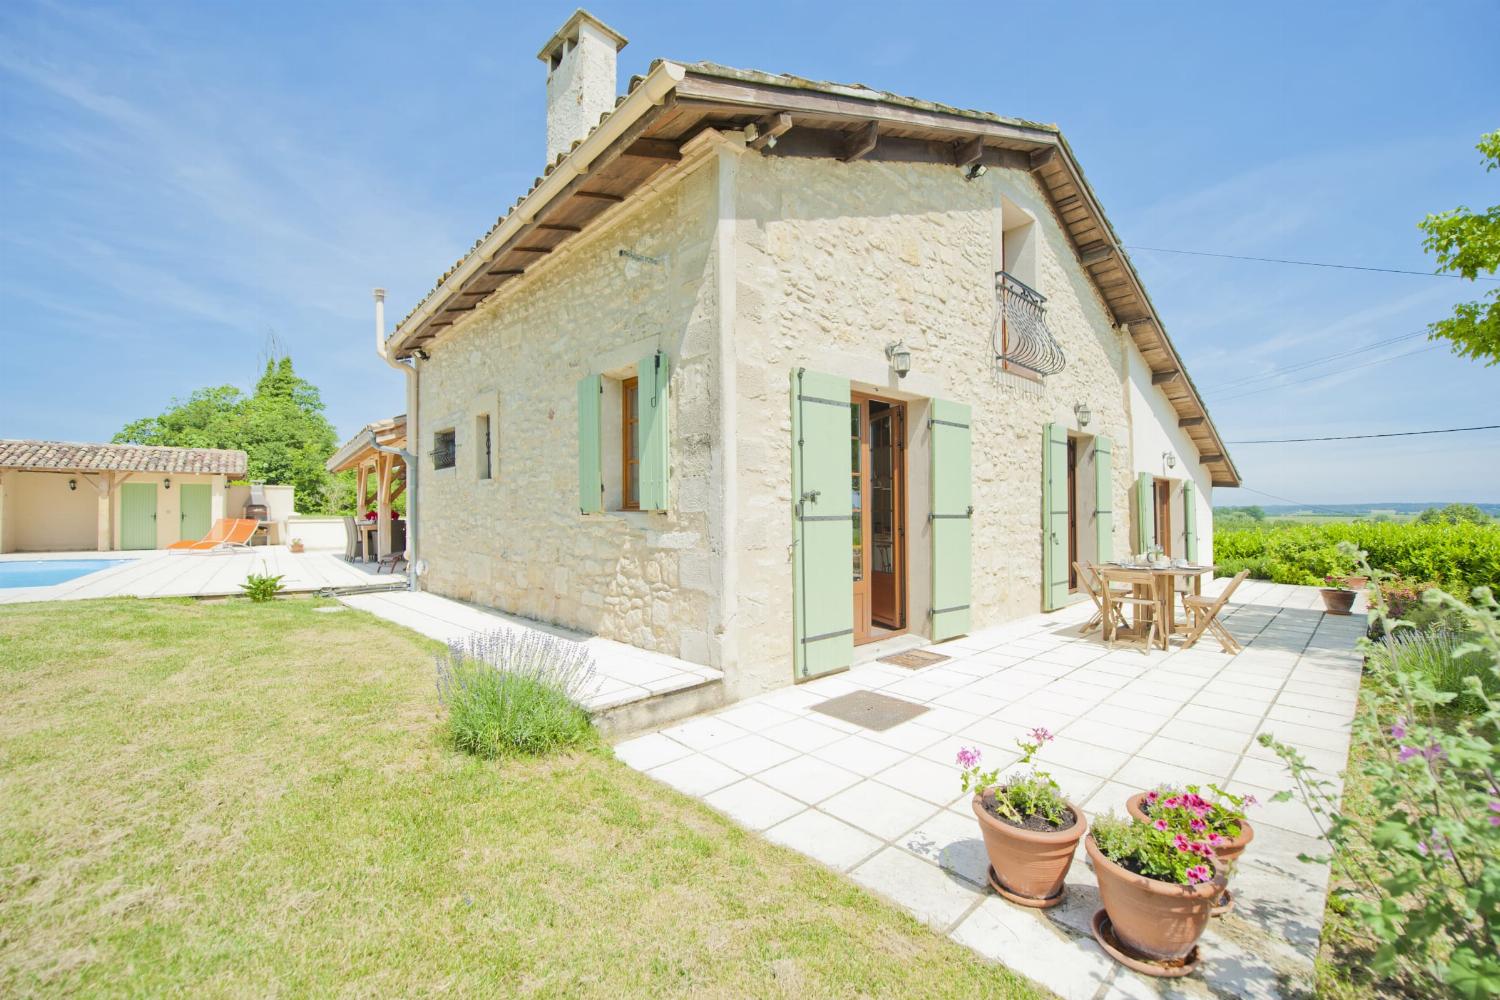 Rental home in Nouvelle-Aquitaine